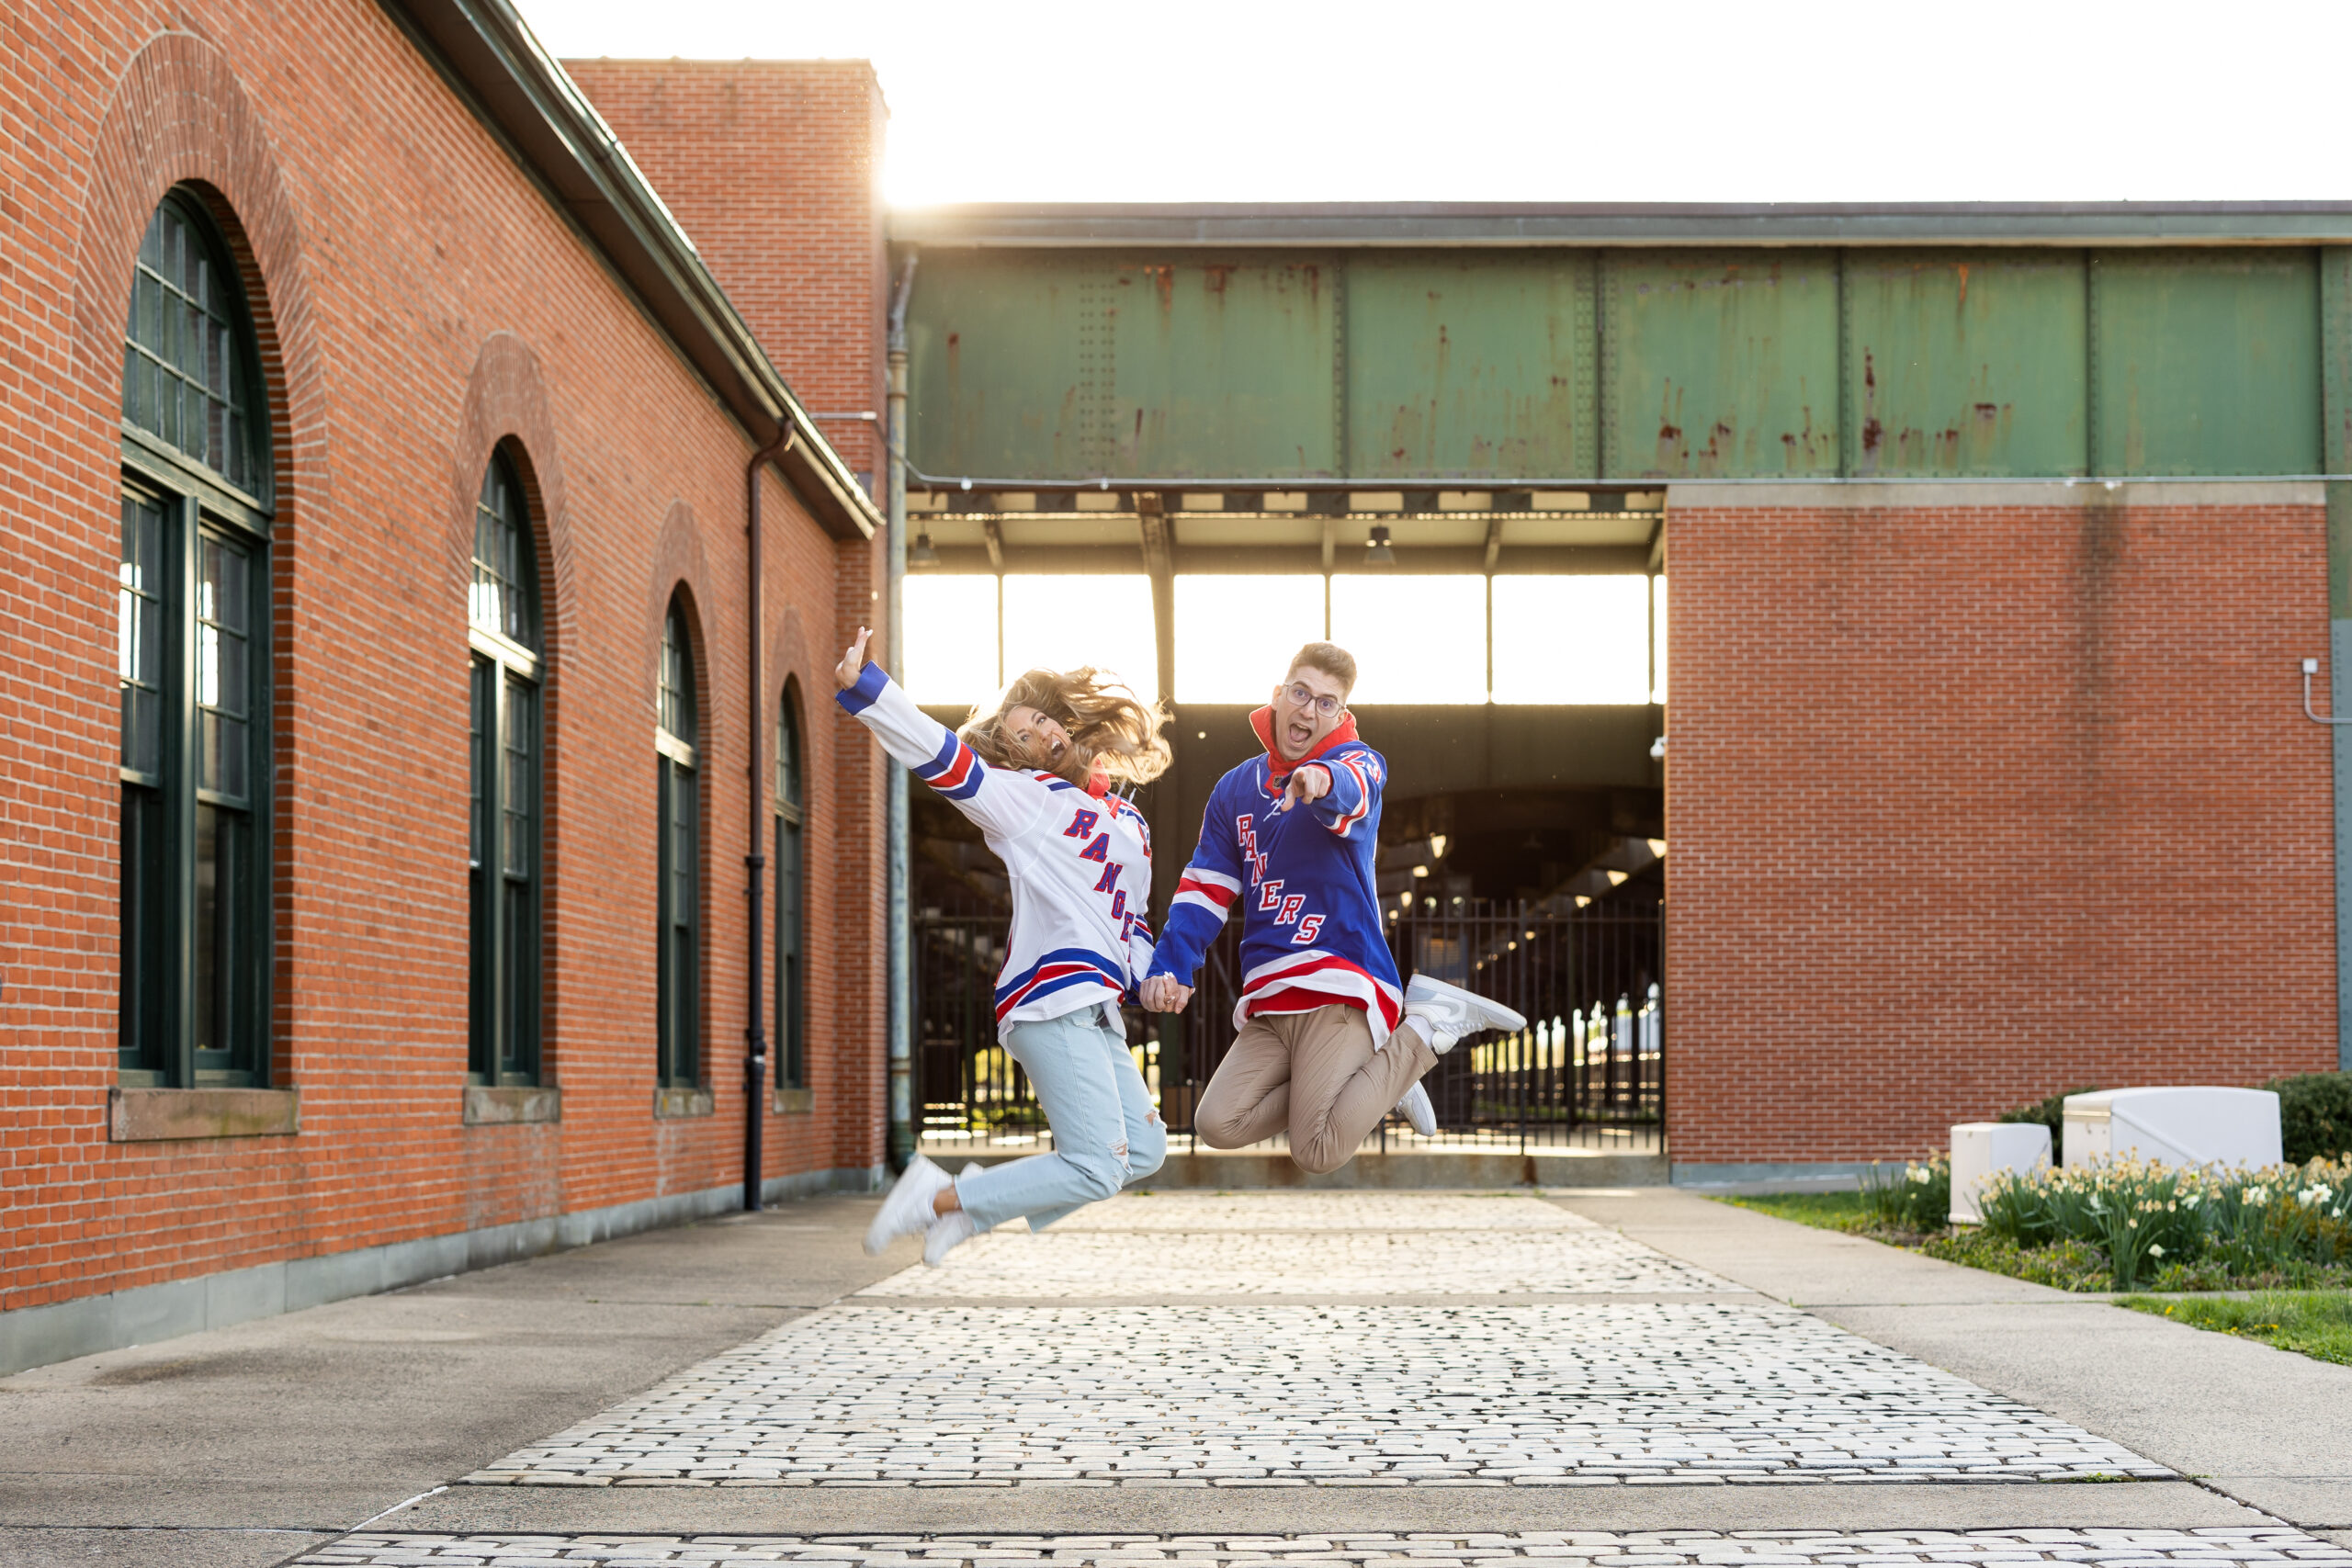 A joyful engagement session moment featuring the couple jumping and having fun at Liberty State Park in Jersey City, New Jersey, while proudly representing their favorite hockey team, the New York Rangers. The exuberant celebration was skillfully captured by North Jersey wedding photographer Jarot Bocanegra